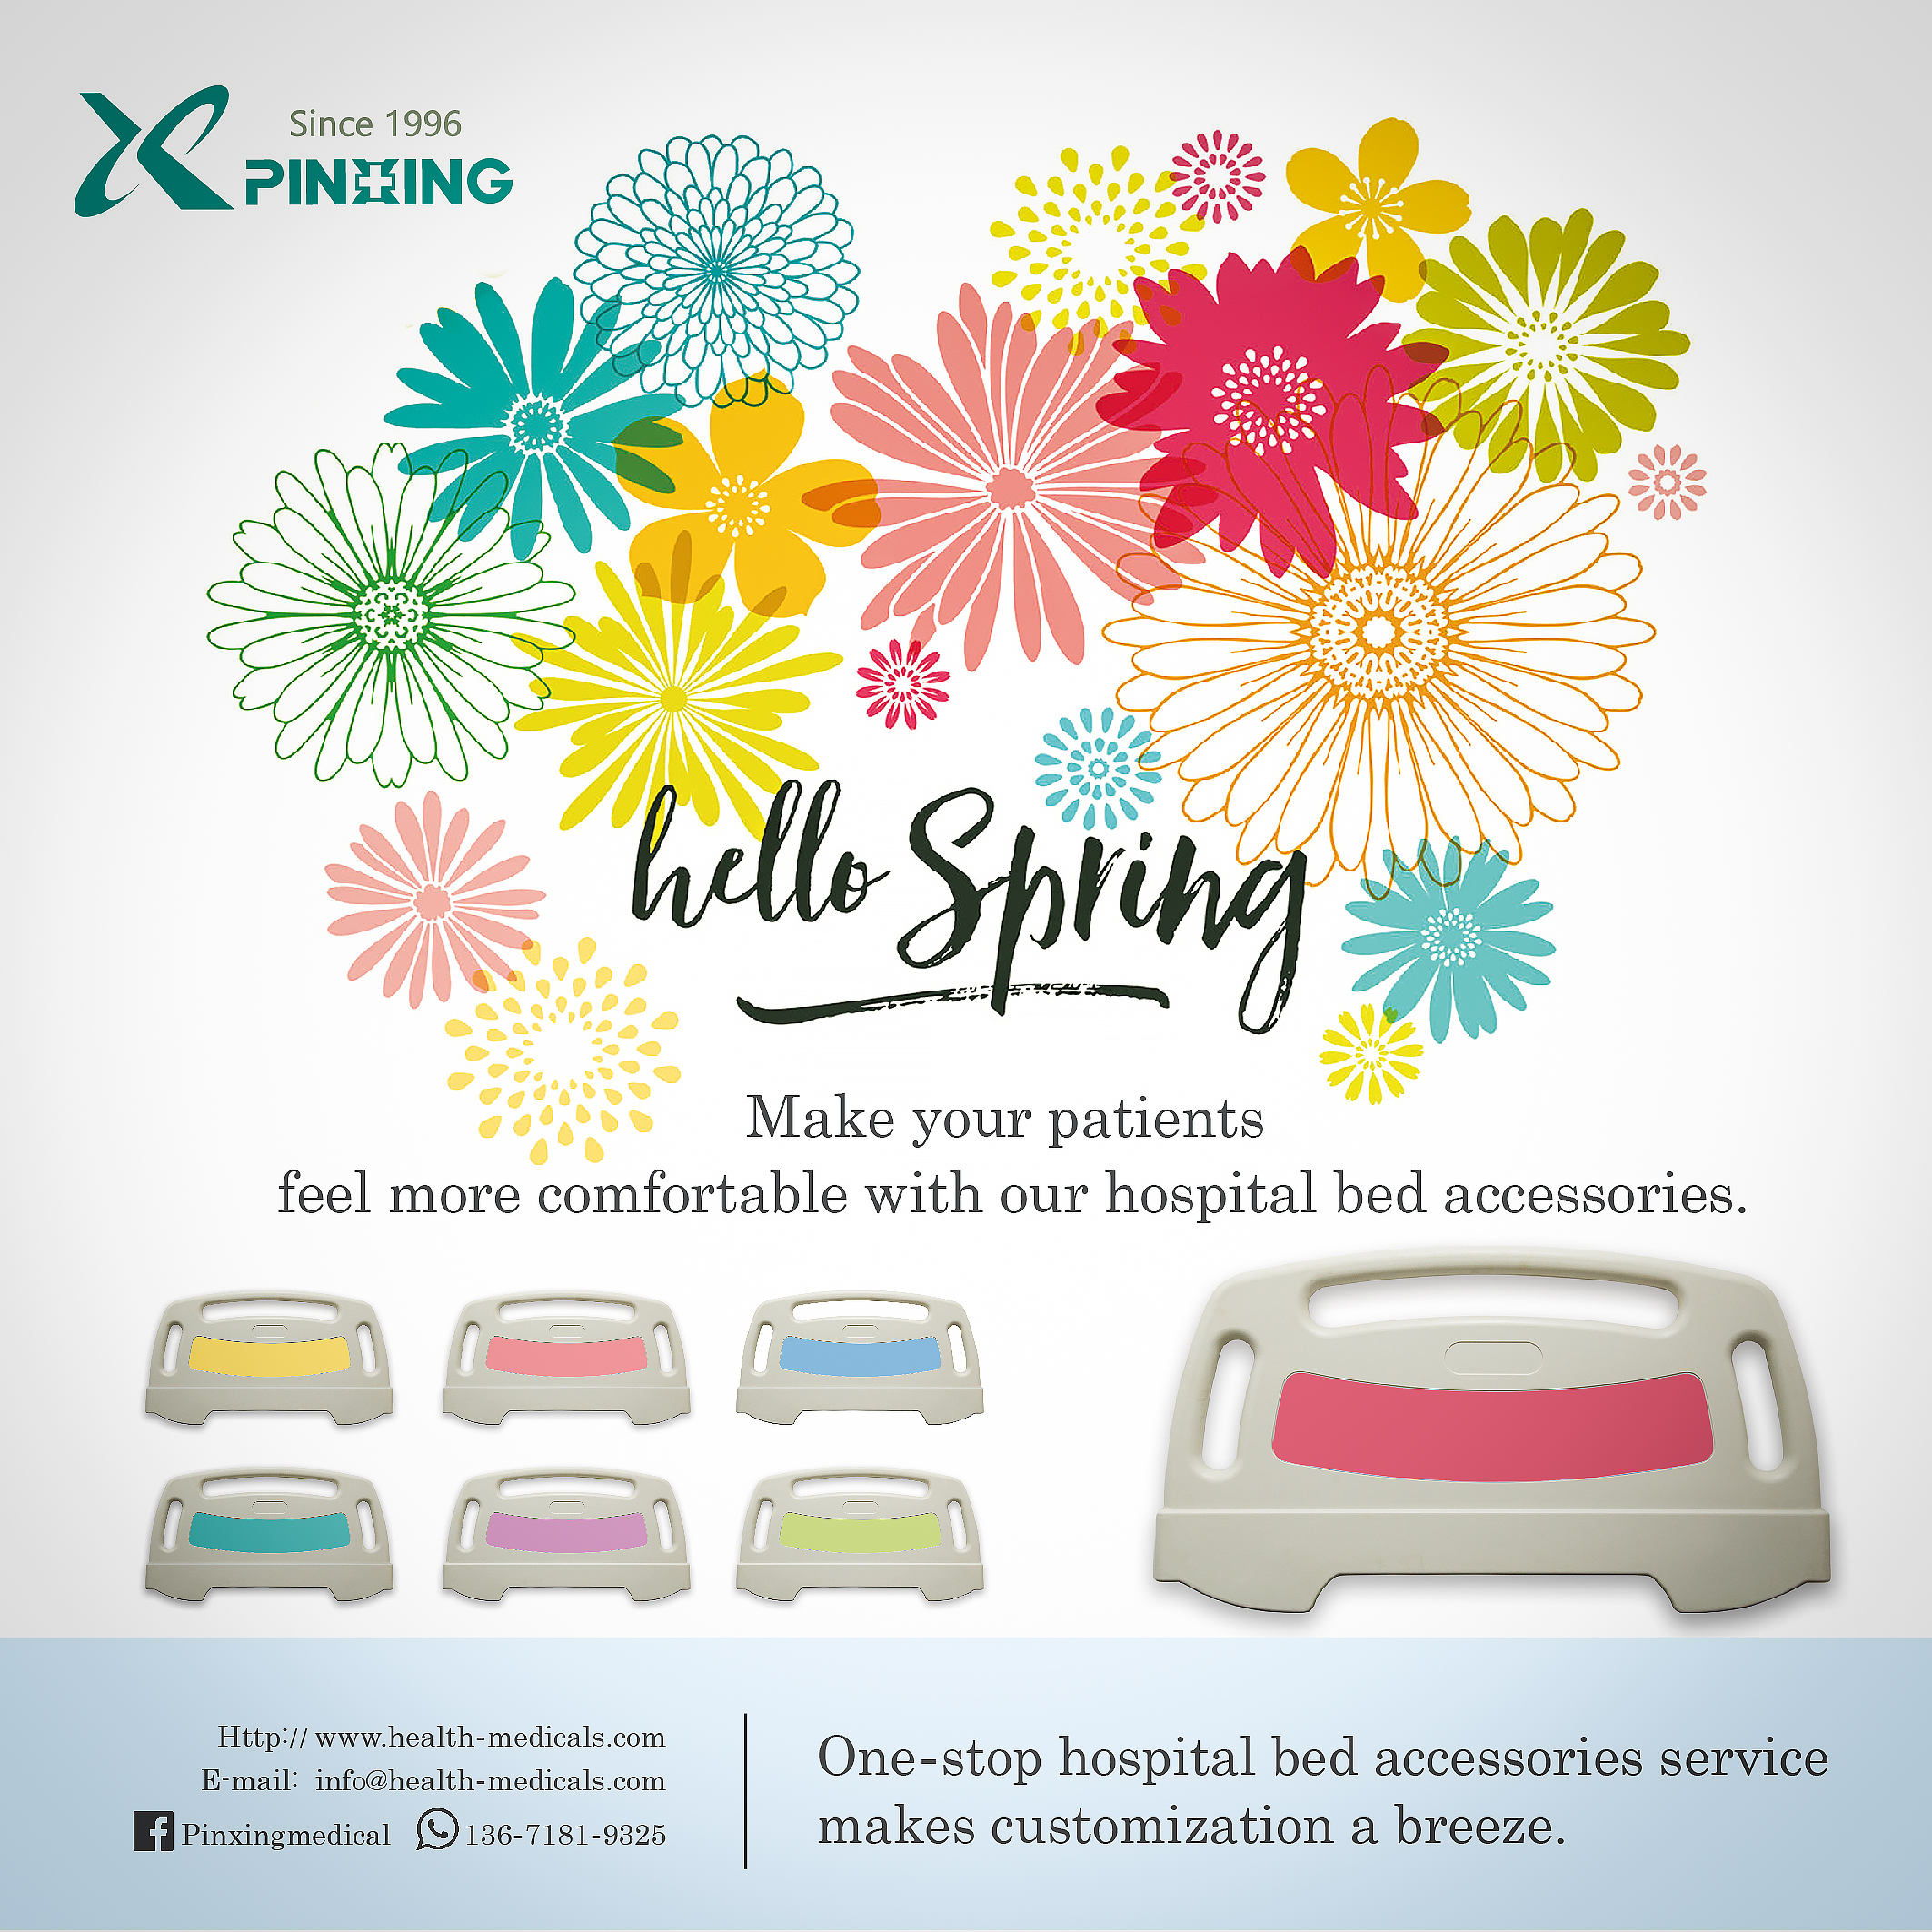 Personalize your hospital beds with our selection of high-quality accessories